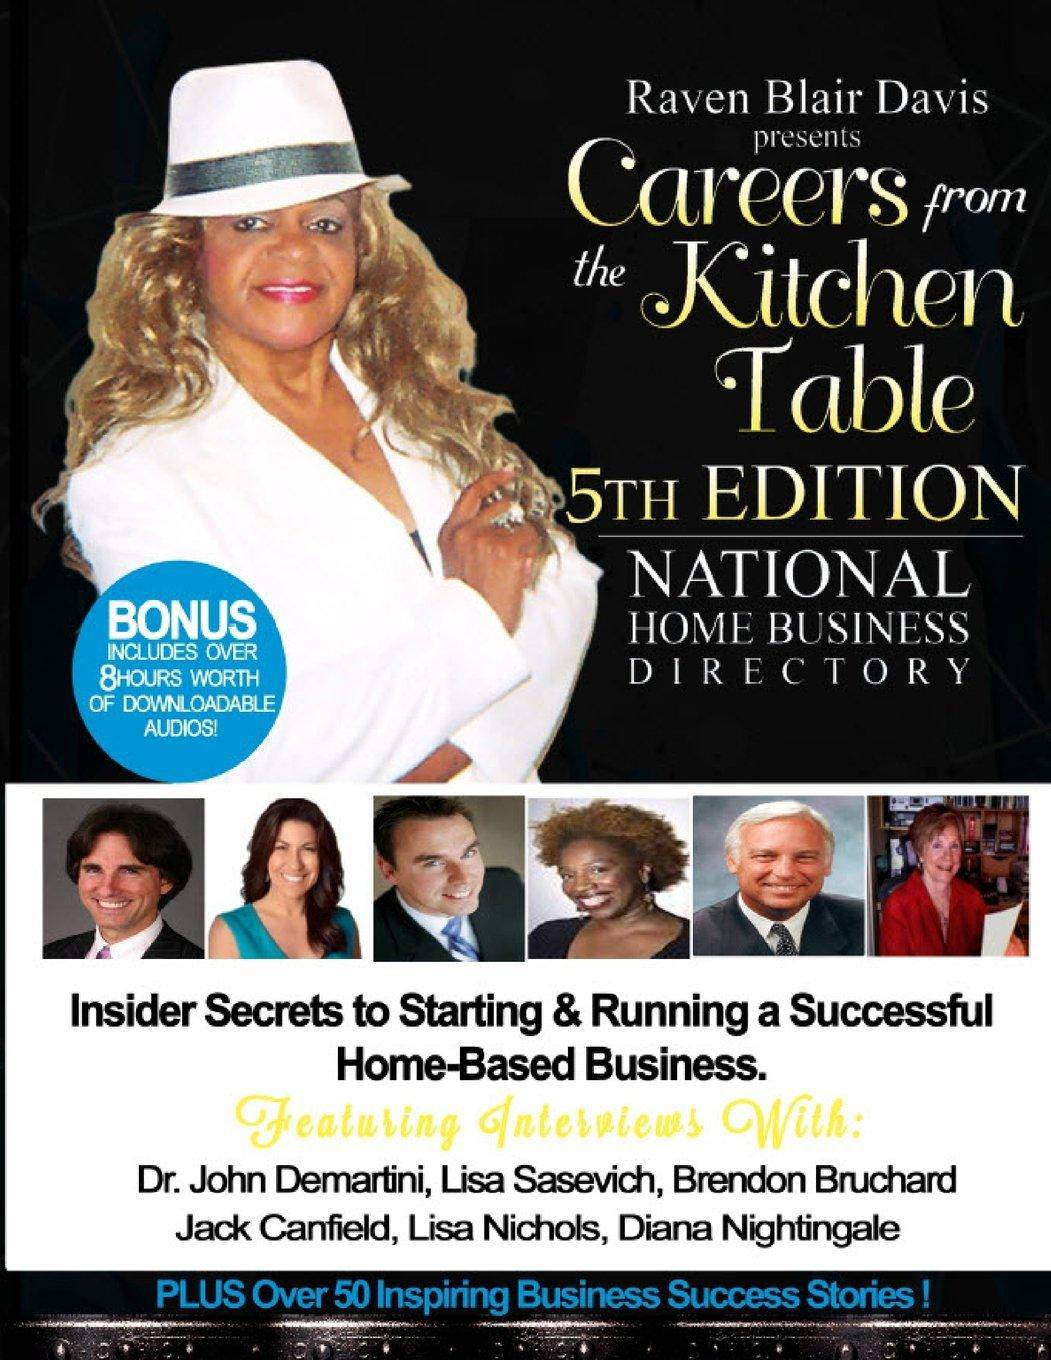 Careers from the Kitchen Table Home Business Directory - SureShot Books Publishing LLC